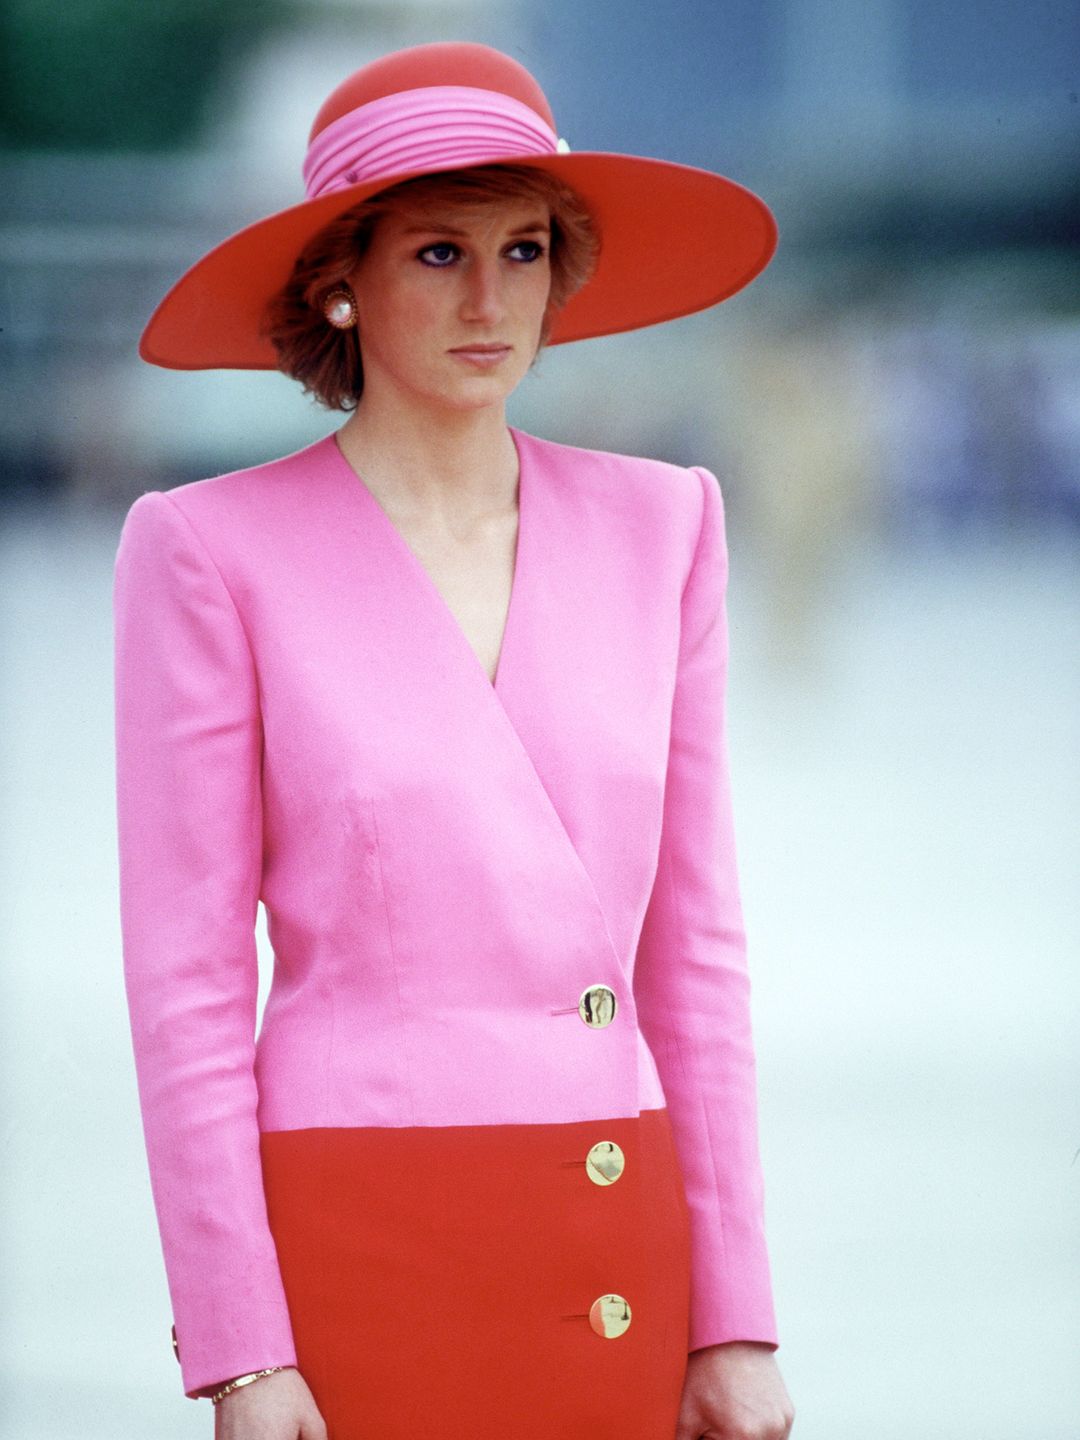 Princess Diana wearing a clashing red and pink Catherine Walker outfit